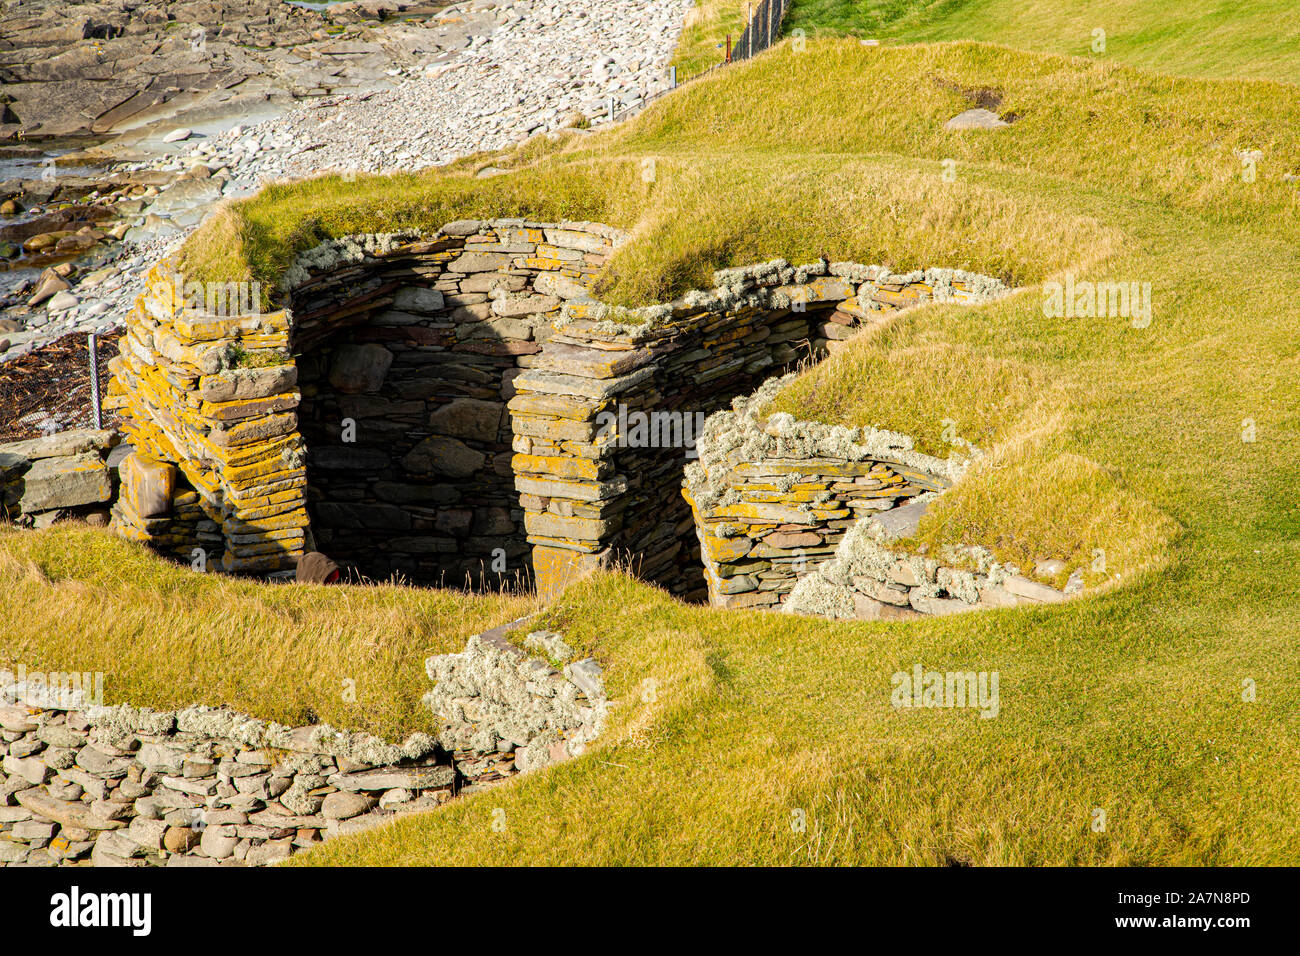 The wheelhouse built 2C to 3C CE, the round building has spurs inside to support the roof creating a wheel like effect, built over the Iron Age Broch Stock Photo